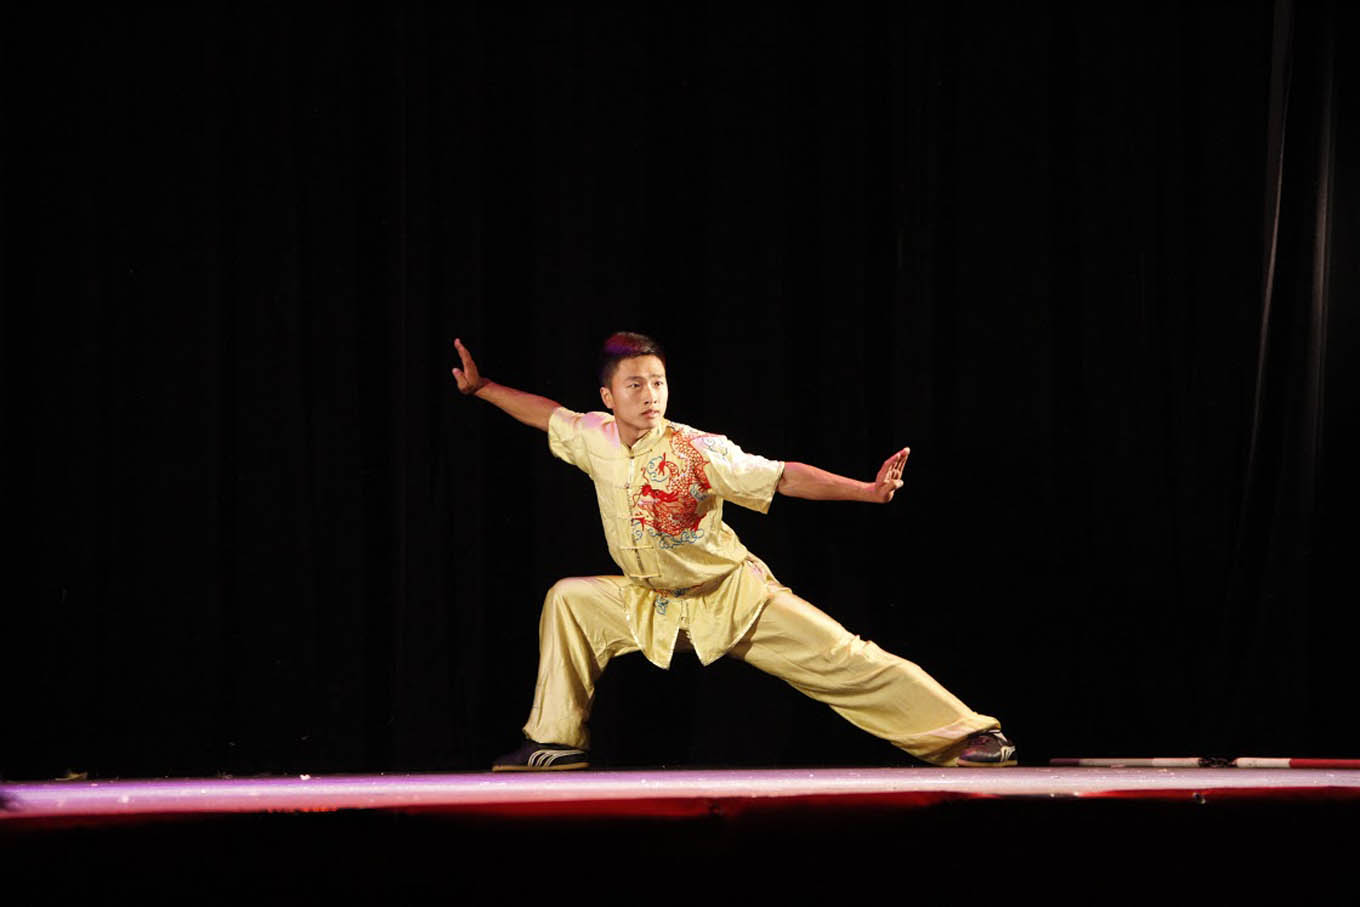 Click to enlarge,  "Chinese Culture &amp; Arts" will take place at 7 p.m. on Monday, Oct. 15, at the Dennis A. Wicker Civic Center in Sanford. An arts troupe from South-Central University for Nationalities will perform dance, vocal, instrumental, and martial arts presentations. The event is presented by Central Carolina Community College's Confucius Classroom. Admission to the show is free. For more information on CCCC's Confucius Classroom, visit the college's website, www.cccc.edu/confucius. 